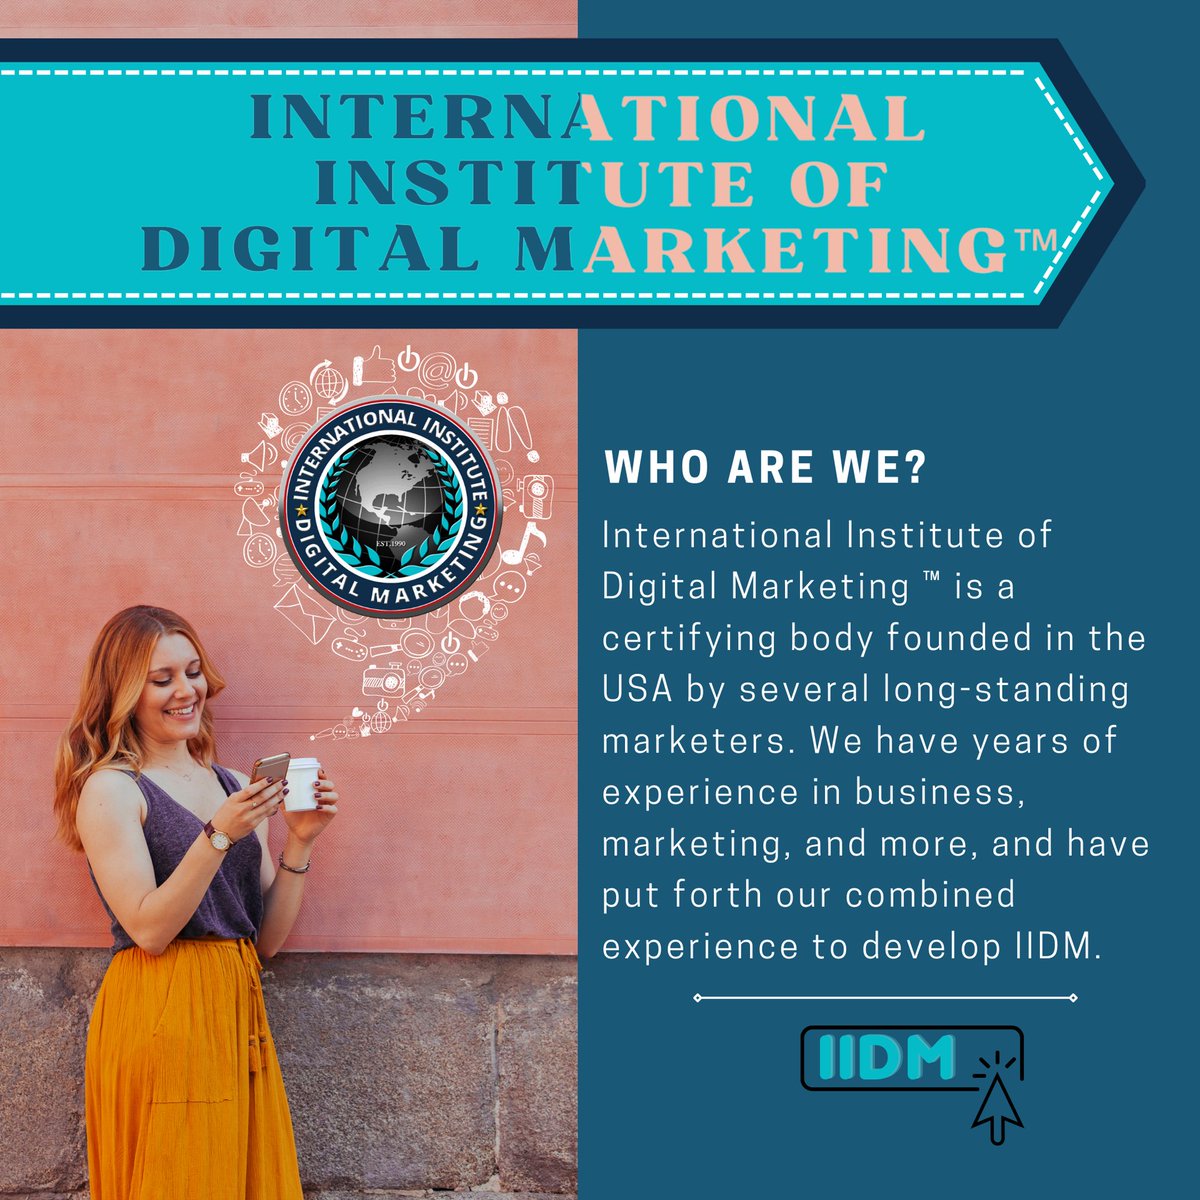 IIDM is an impact non-profit certifying body representing more than 20,000 influential brands. We help our members to become more effective digital marketers, build stronger brands.

theiidm.org

#iidm #digitalmarketing #market #brandawareness